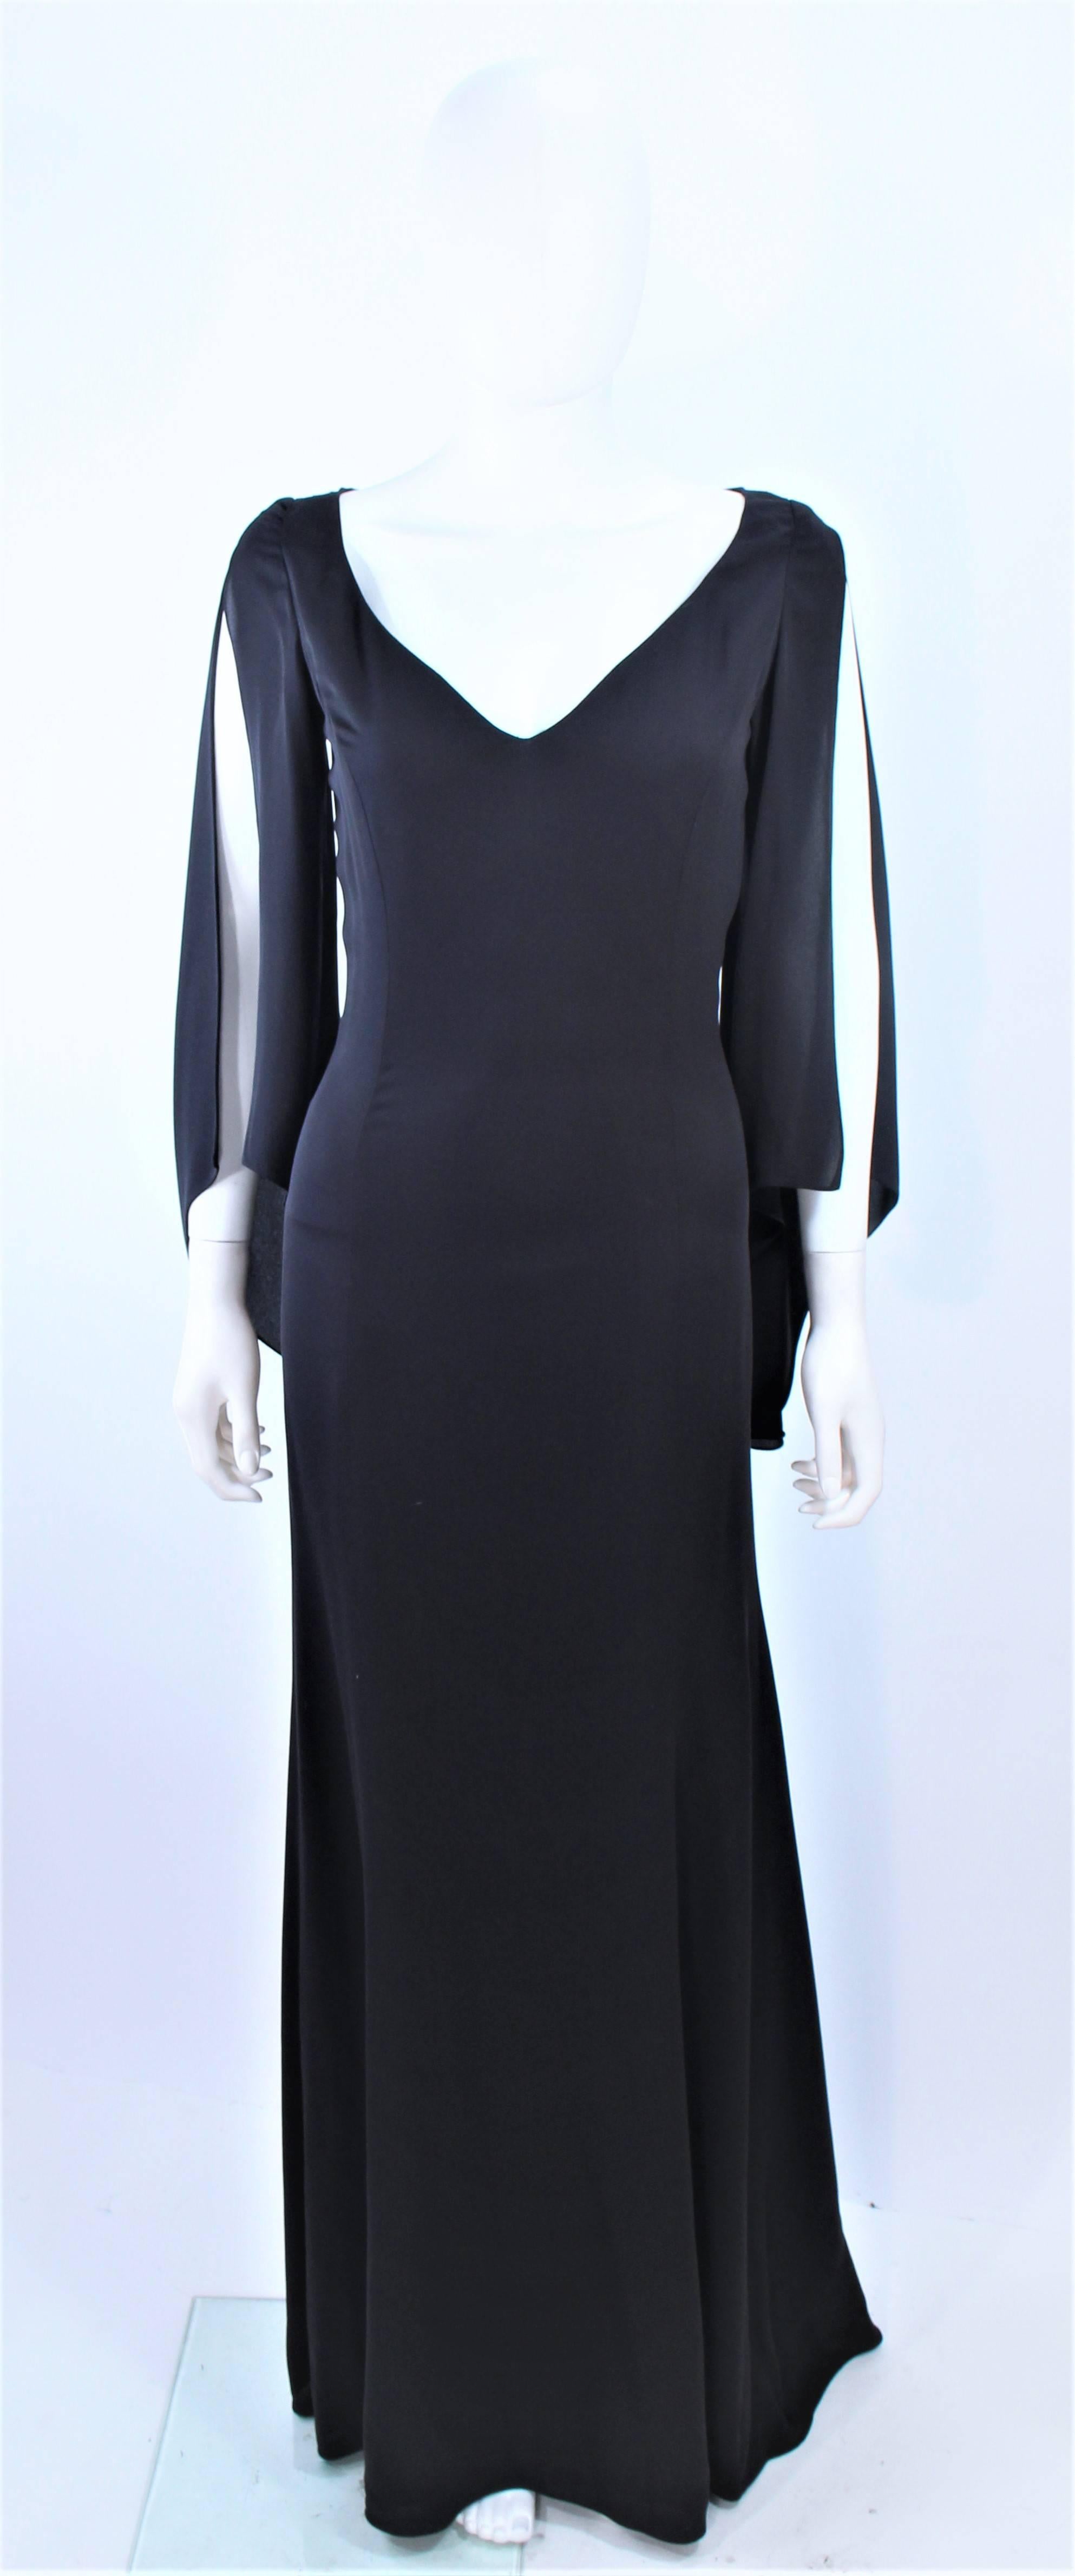 This Carolina Herrera gown is composed of a black chiffon with draped open style sleeves. There is a zipper closure. In excellent vintage condition.

**Please cross-reference measurements for personal accuracy. Size in description box is an